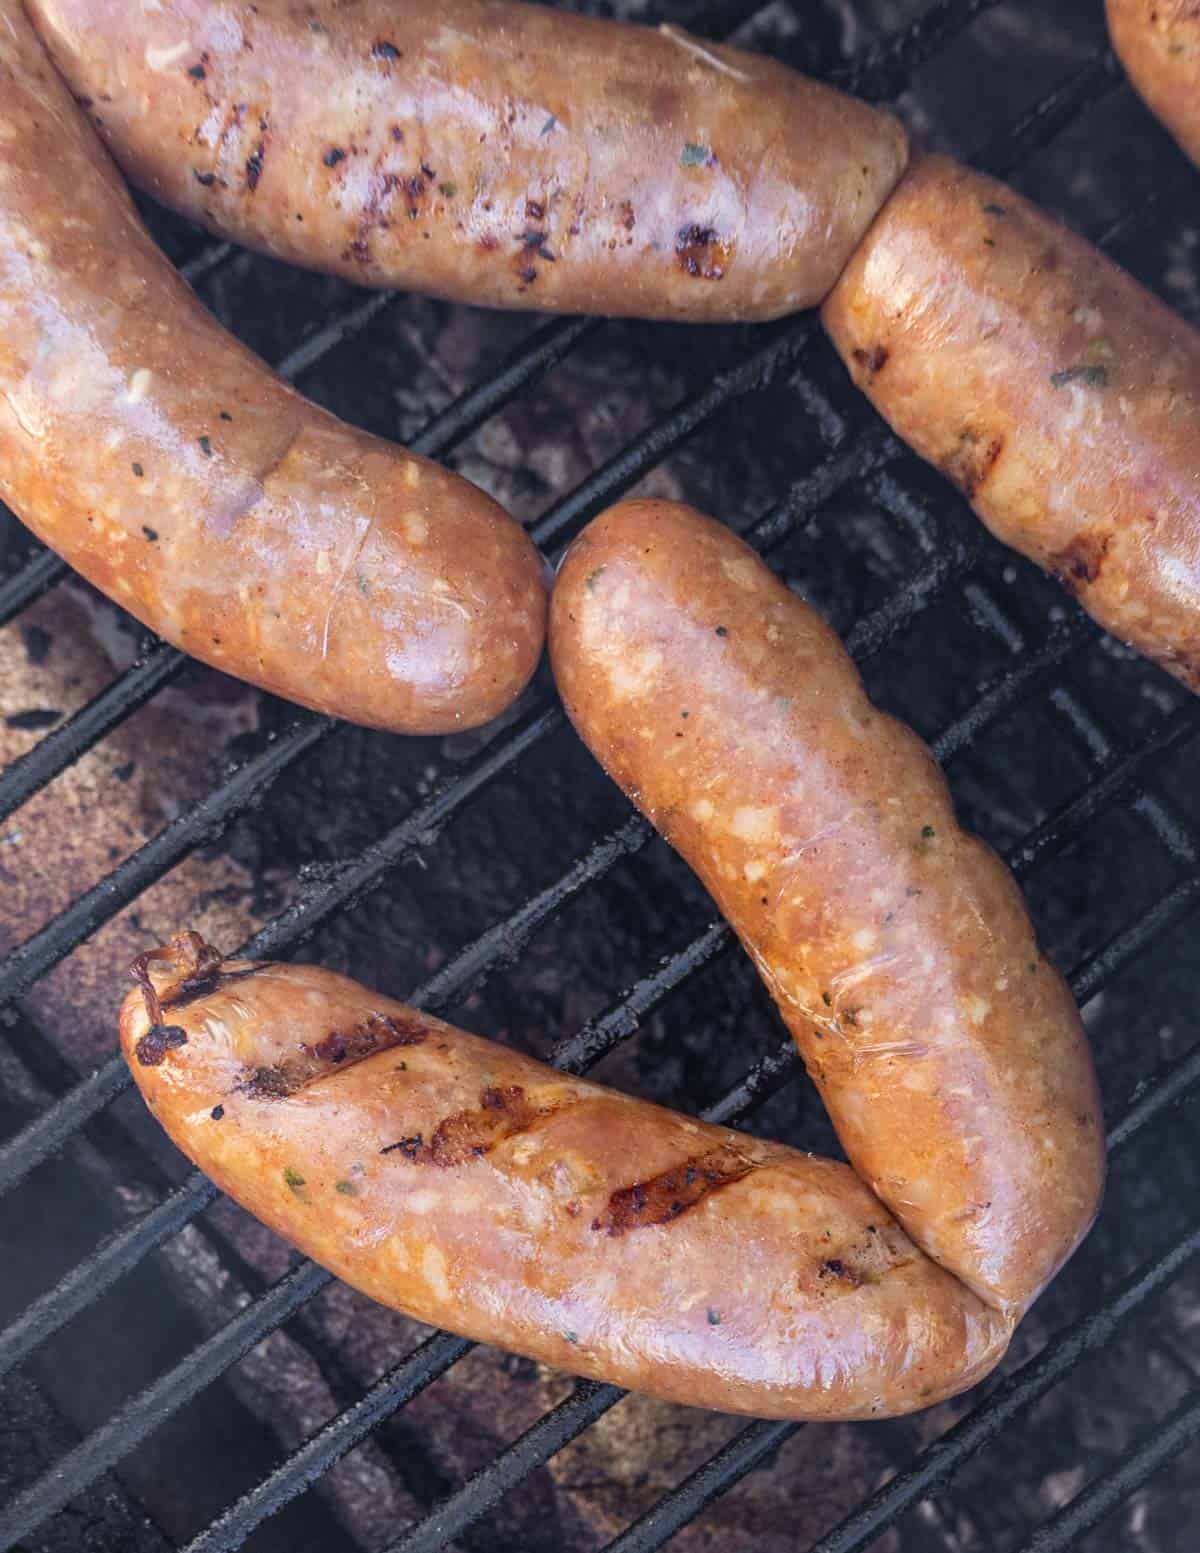 Smoking chicken andouille sausage in a pellet grill smoker. 